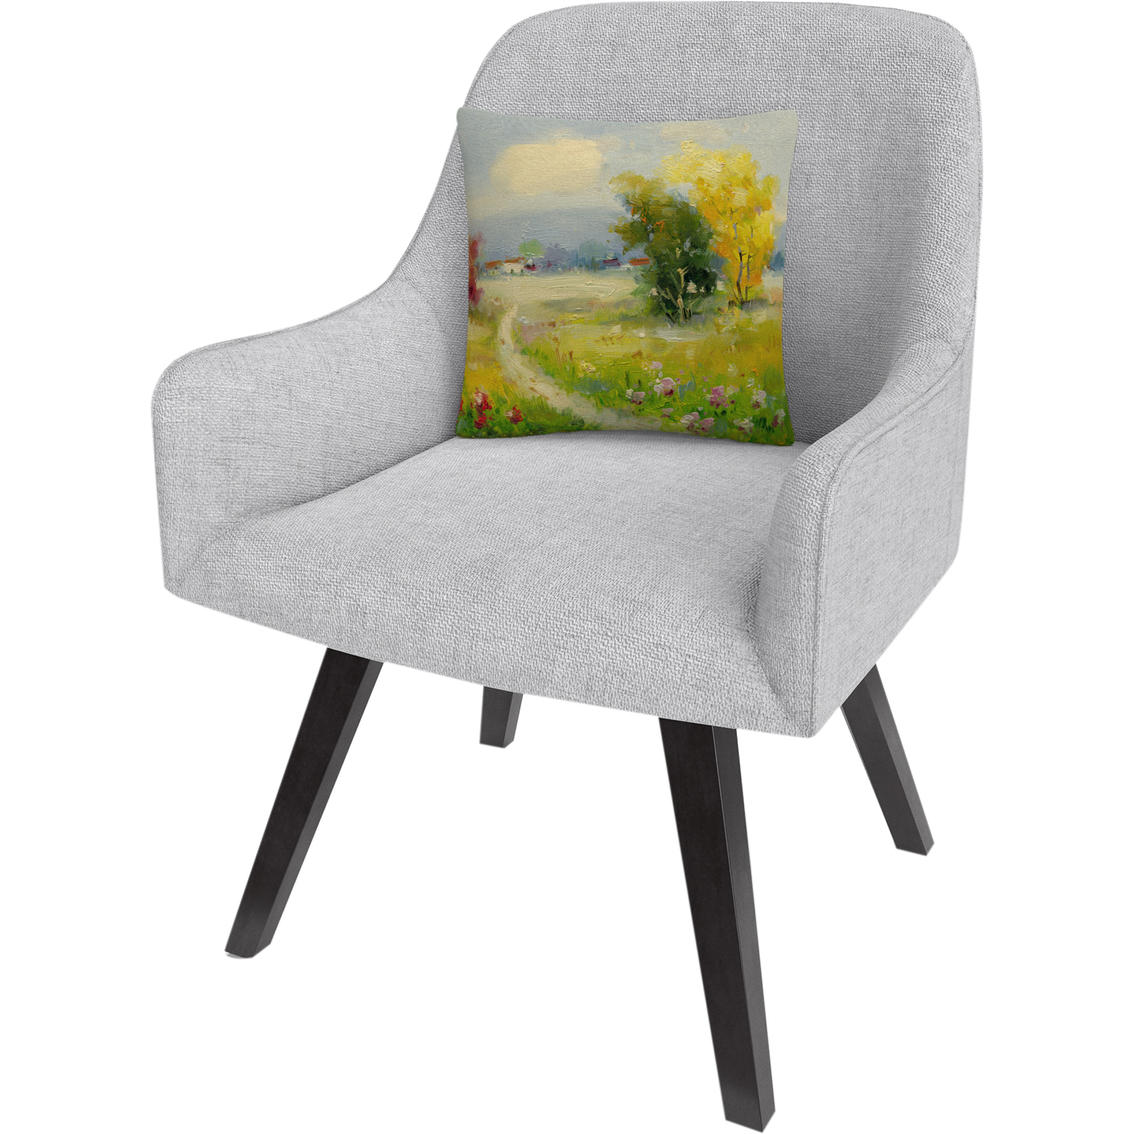 Trademark Fine Art A New Day II Landscape Path Decorative Throw Pillow - Image 2 of 2